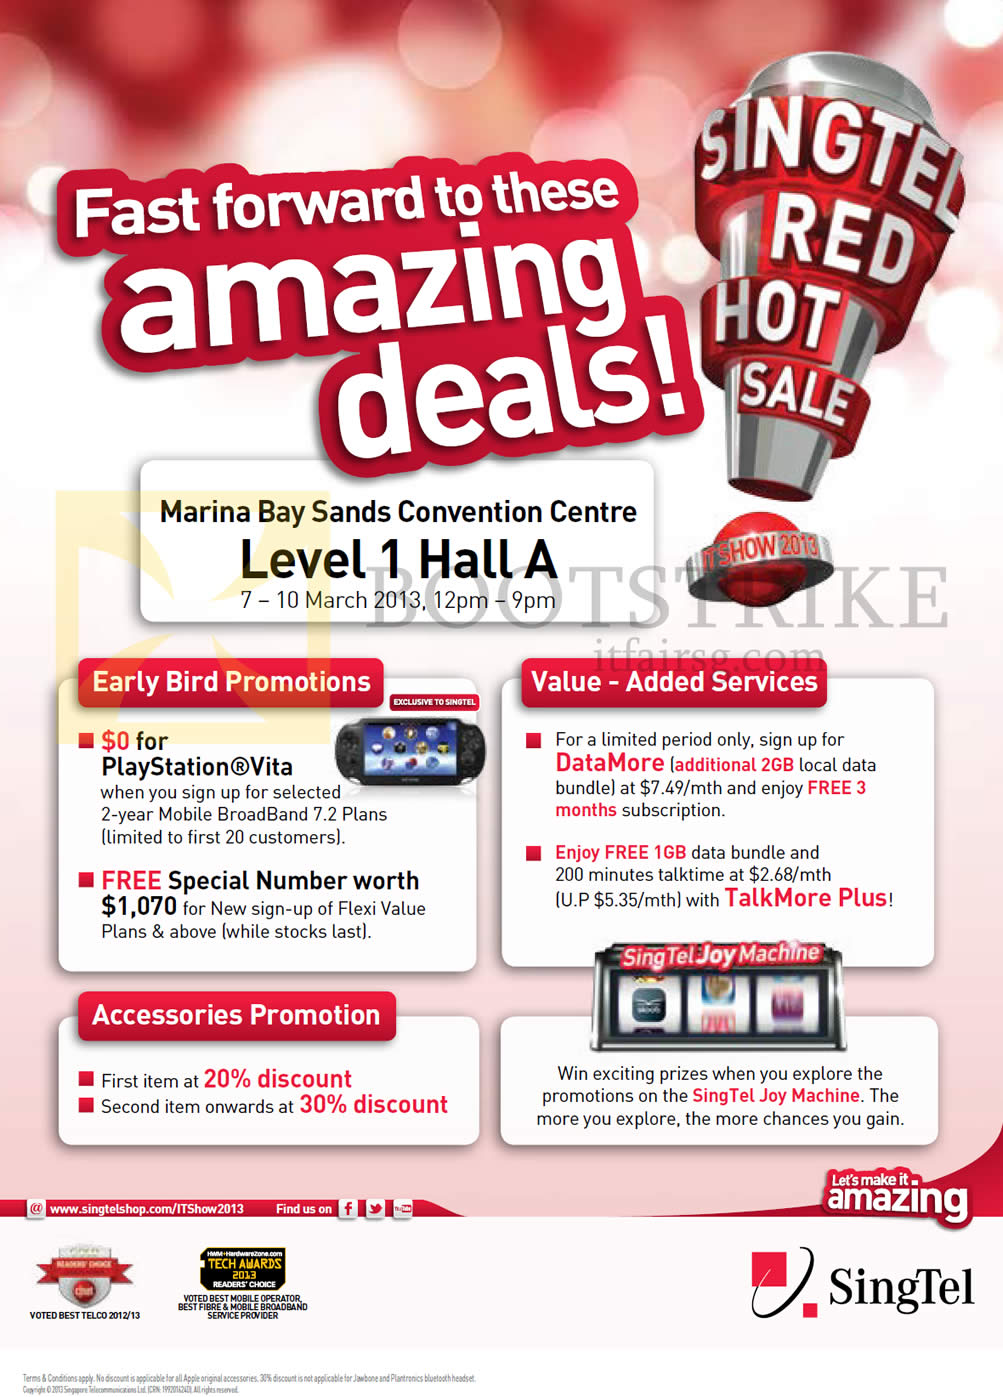 IT SHOW 2013 price list image brochure of Singtel Early Bird Promotions, Free Playstation Vita, Free Special Number, Accessories Discount, Joy Machine